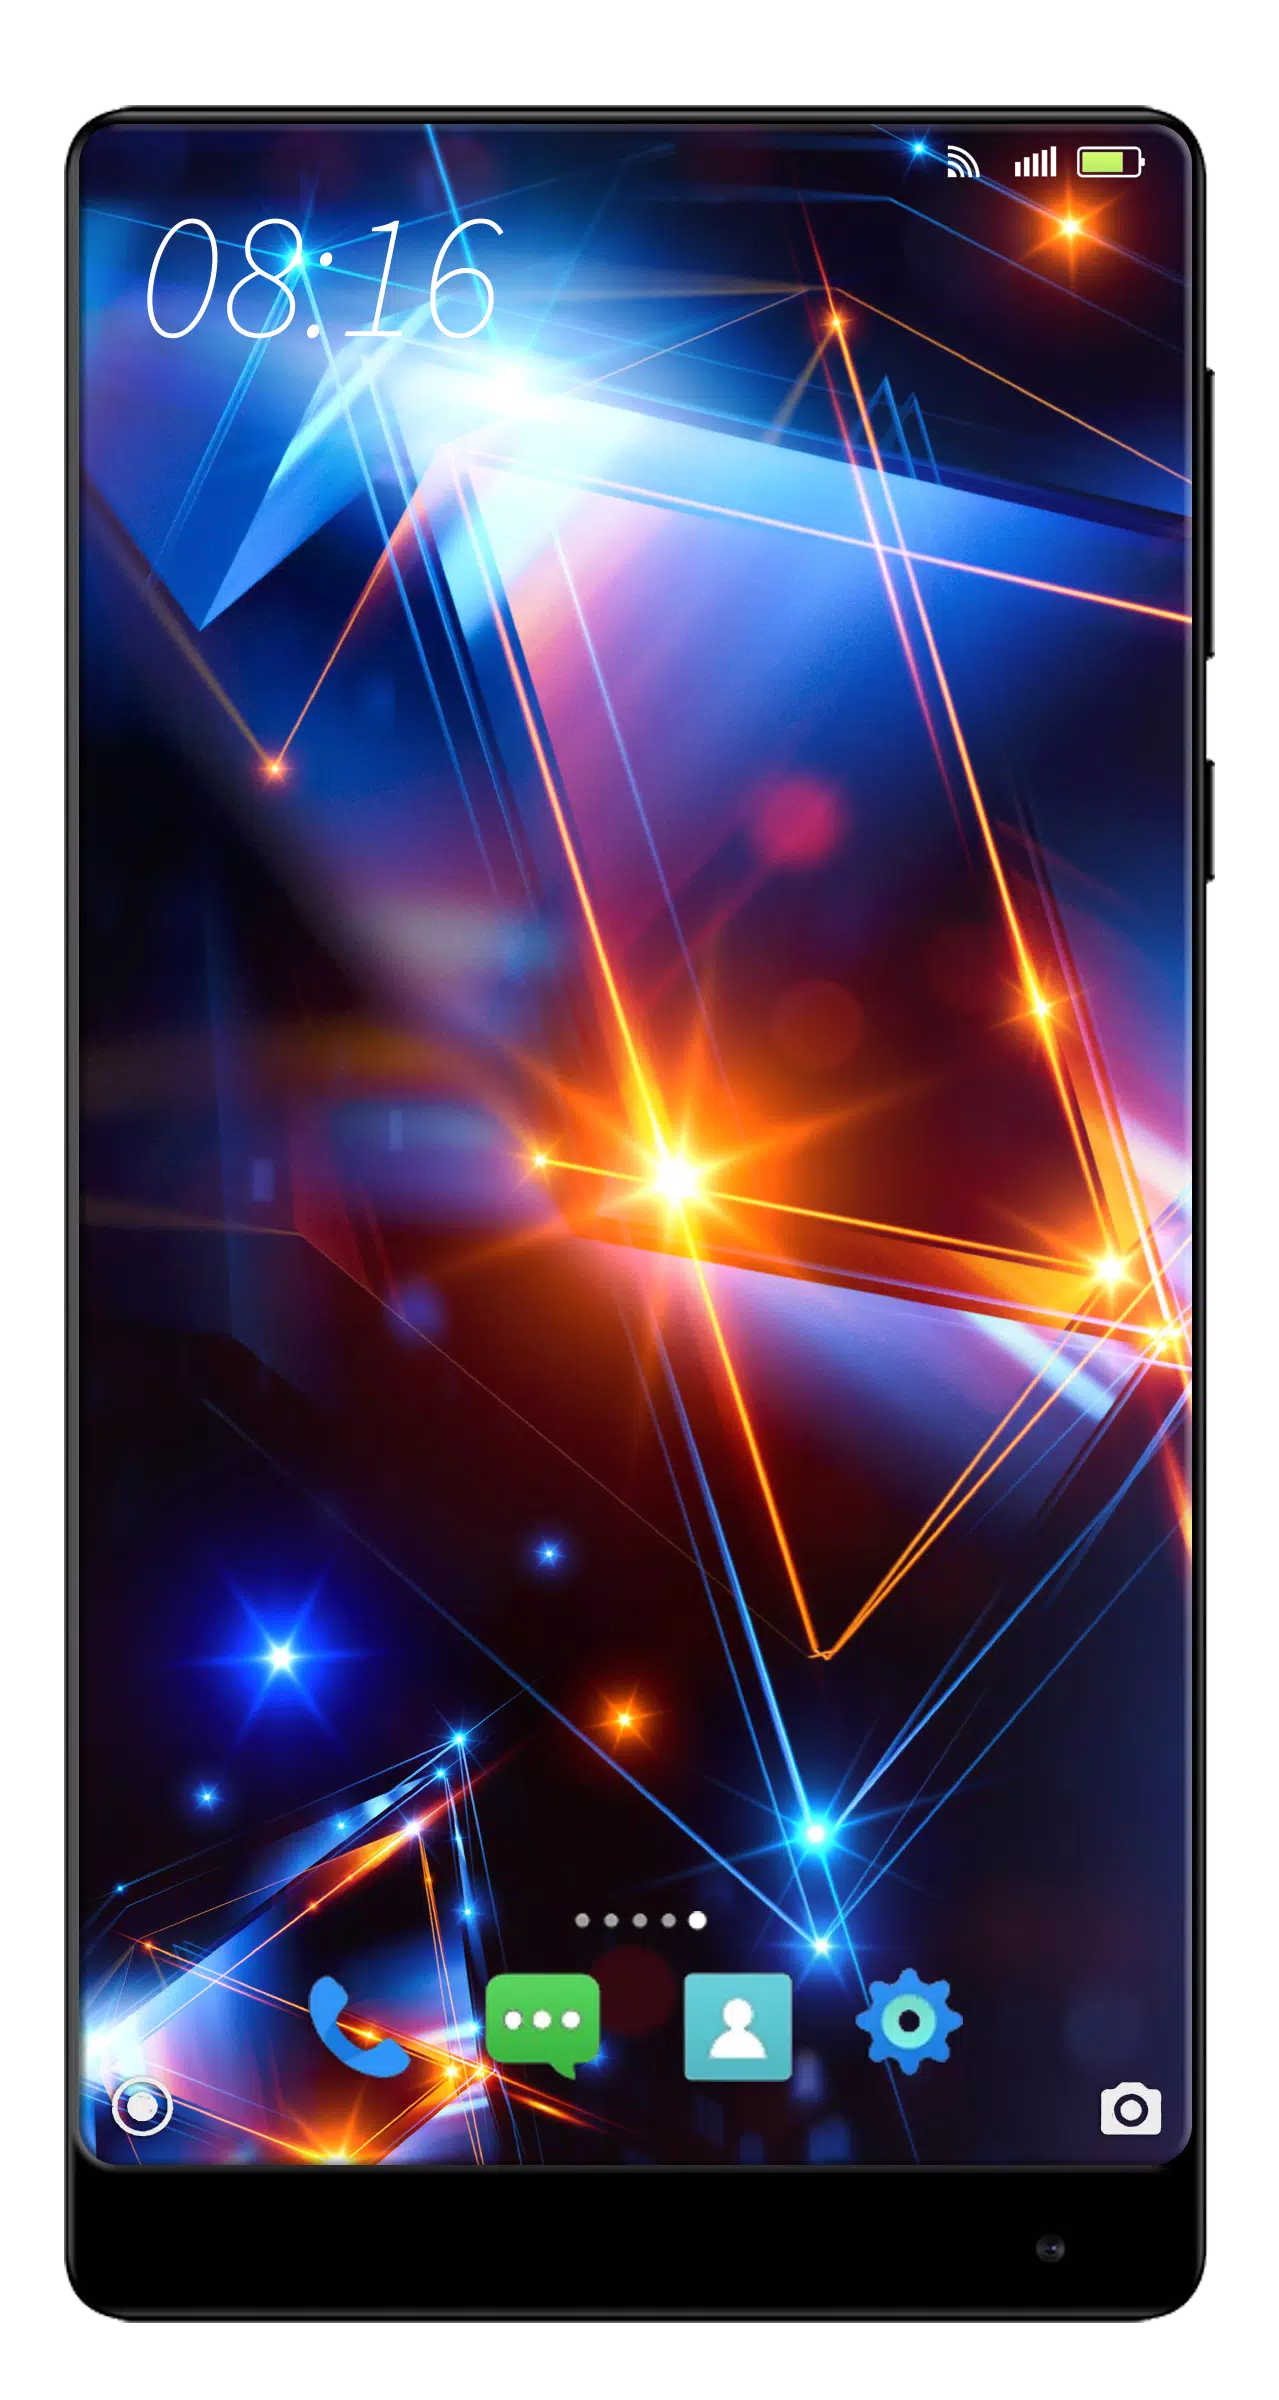 Wallpapers 8K Ultra HD - Apps on Google Play